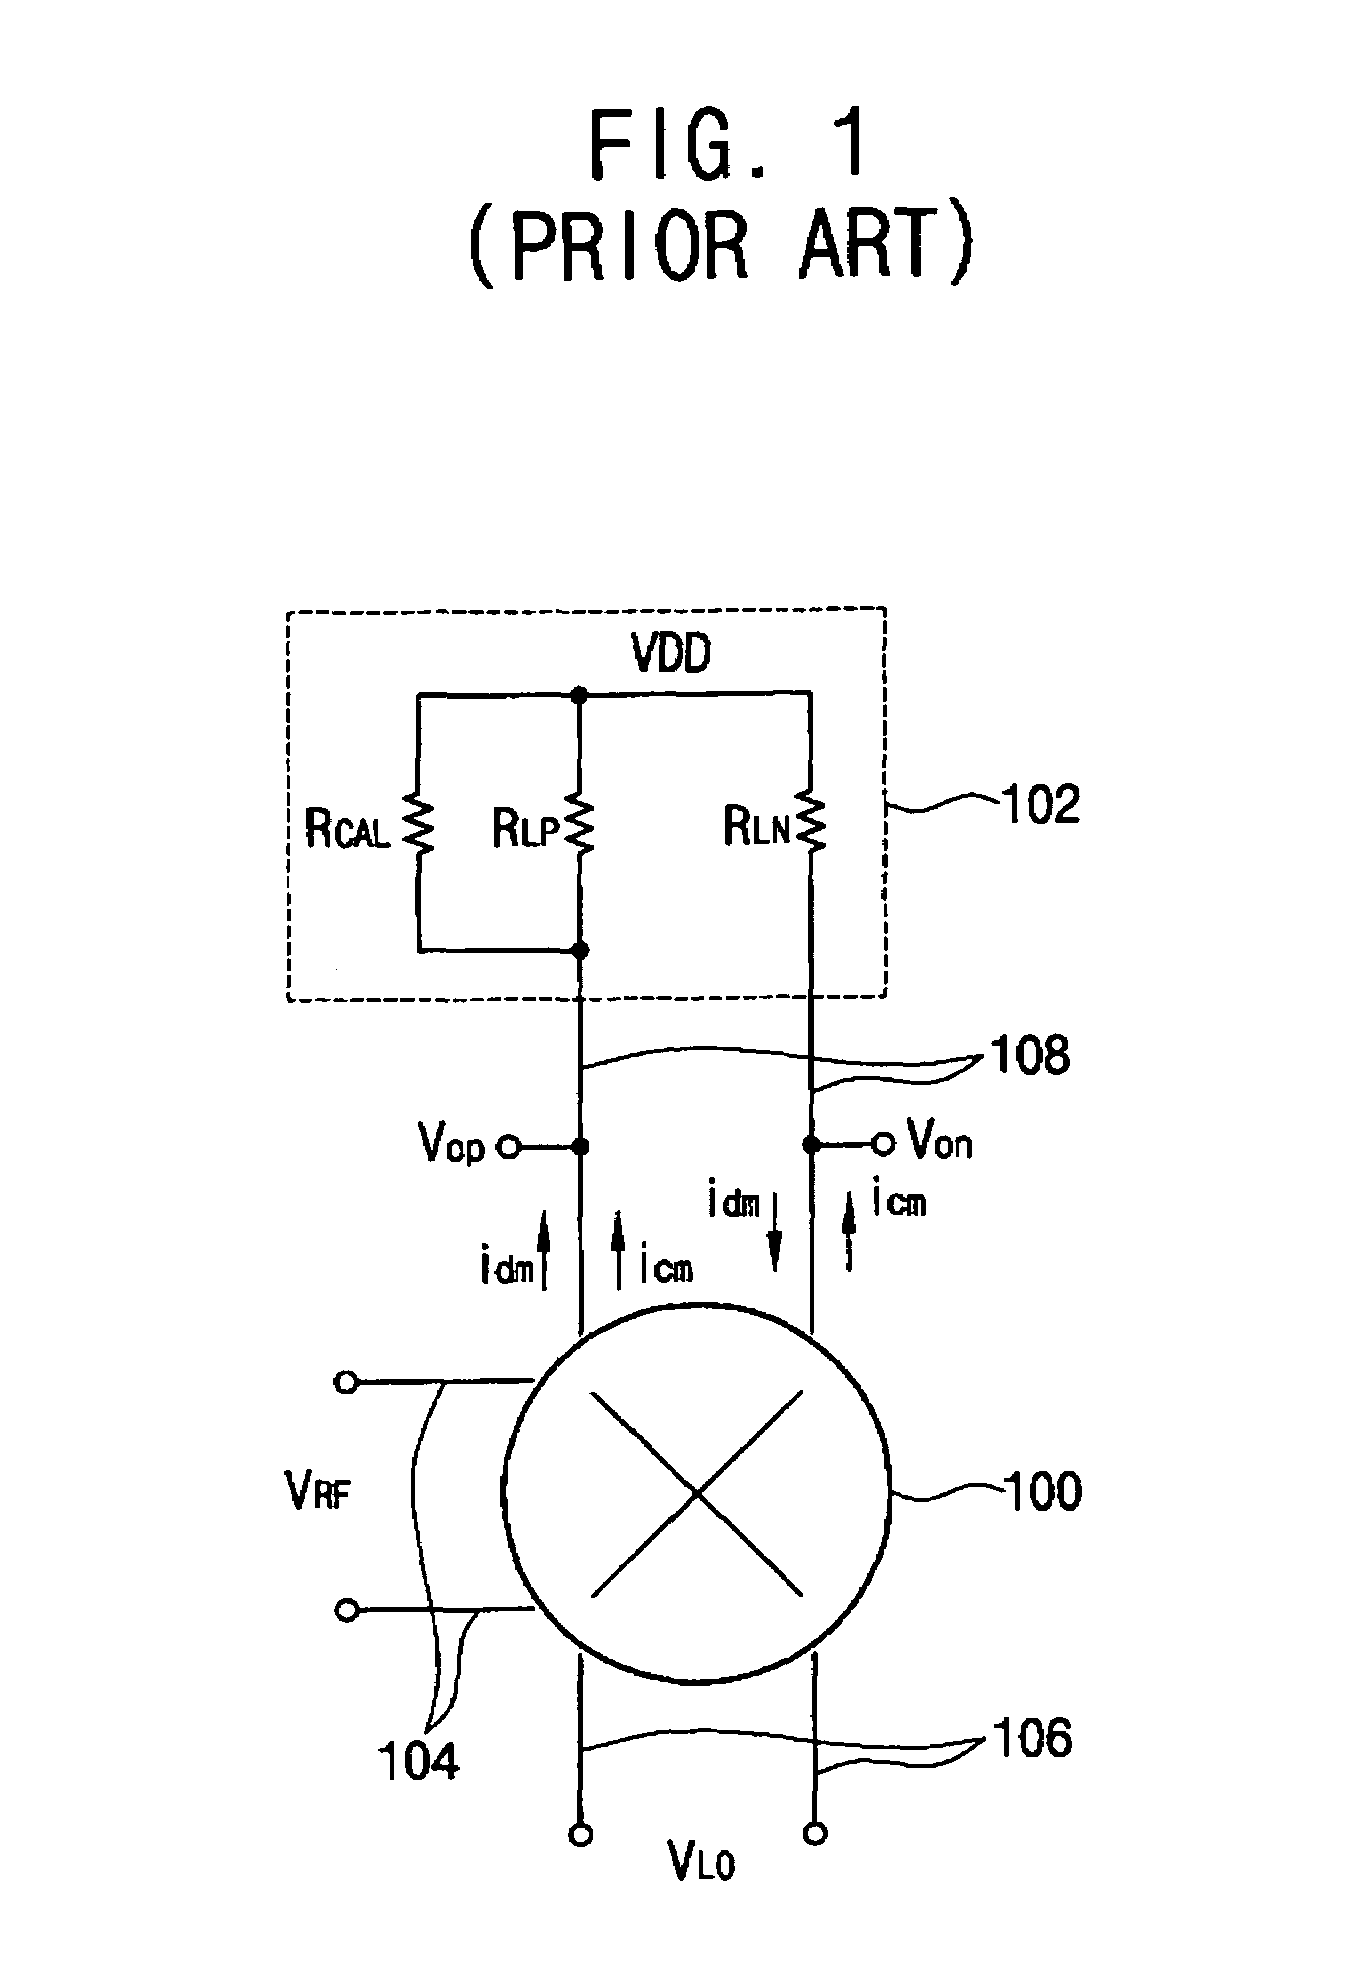 Circuit for reducing second order intermodulation